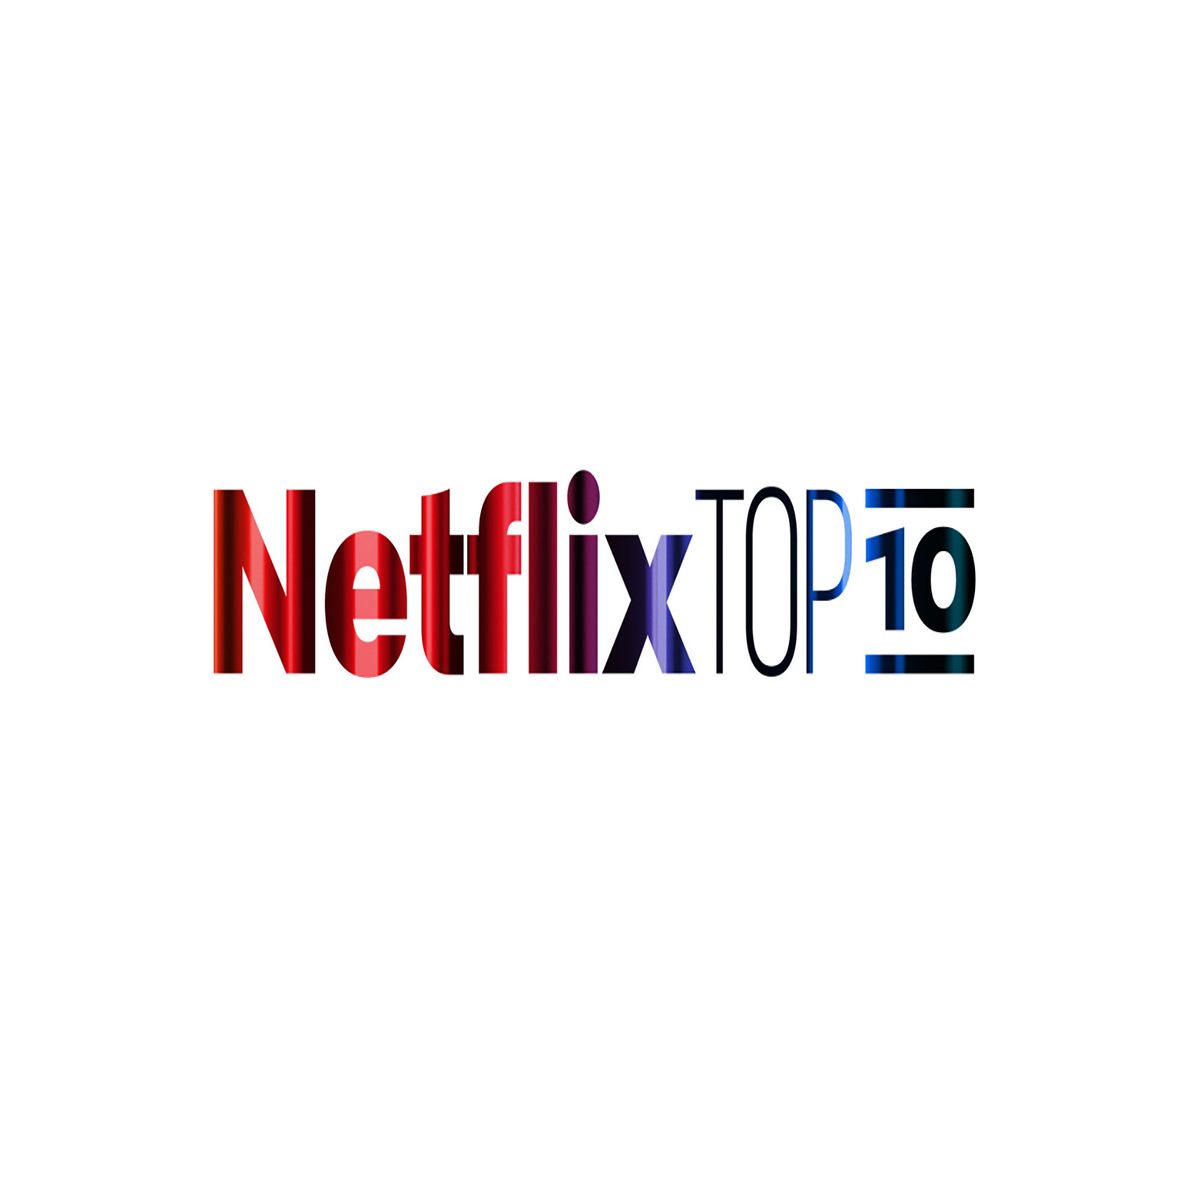 Netflix popular shows and movies in 2022: Netflix announces 2022's most  popular shows and movies. Check full list here - The Economic Times